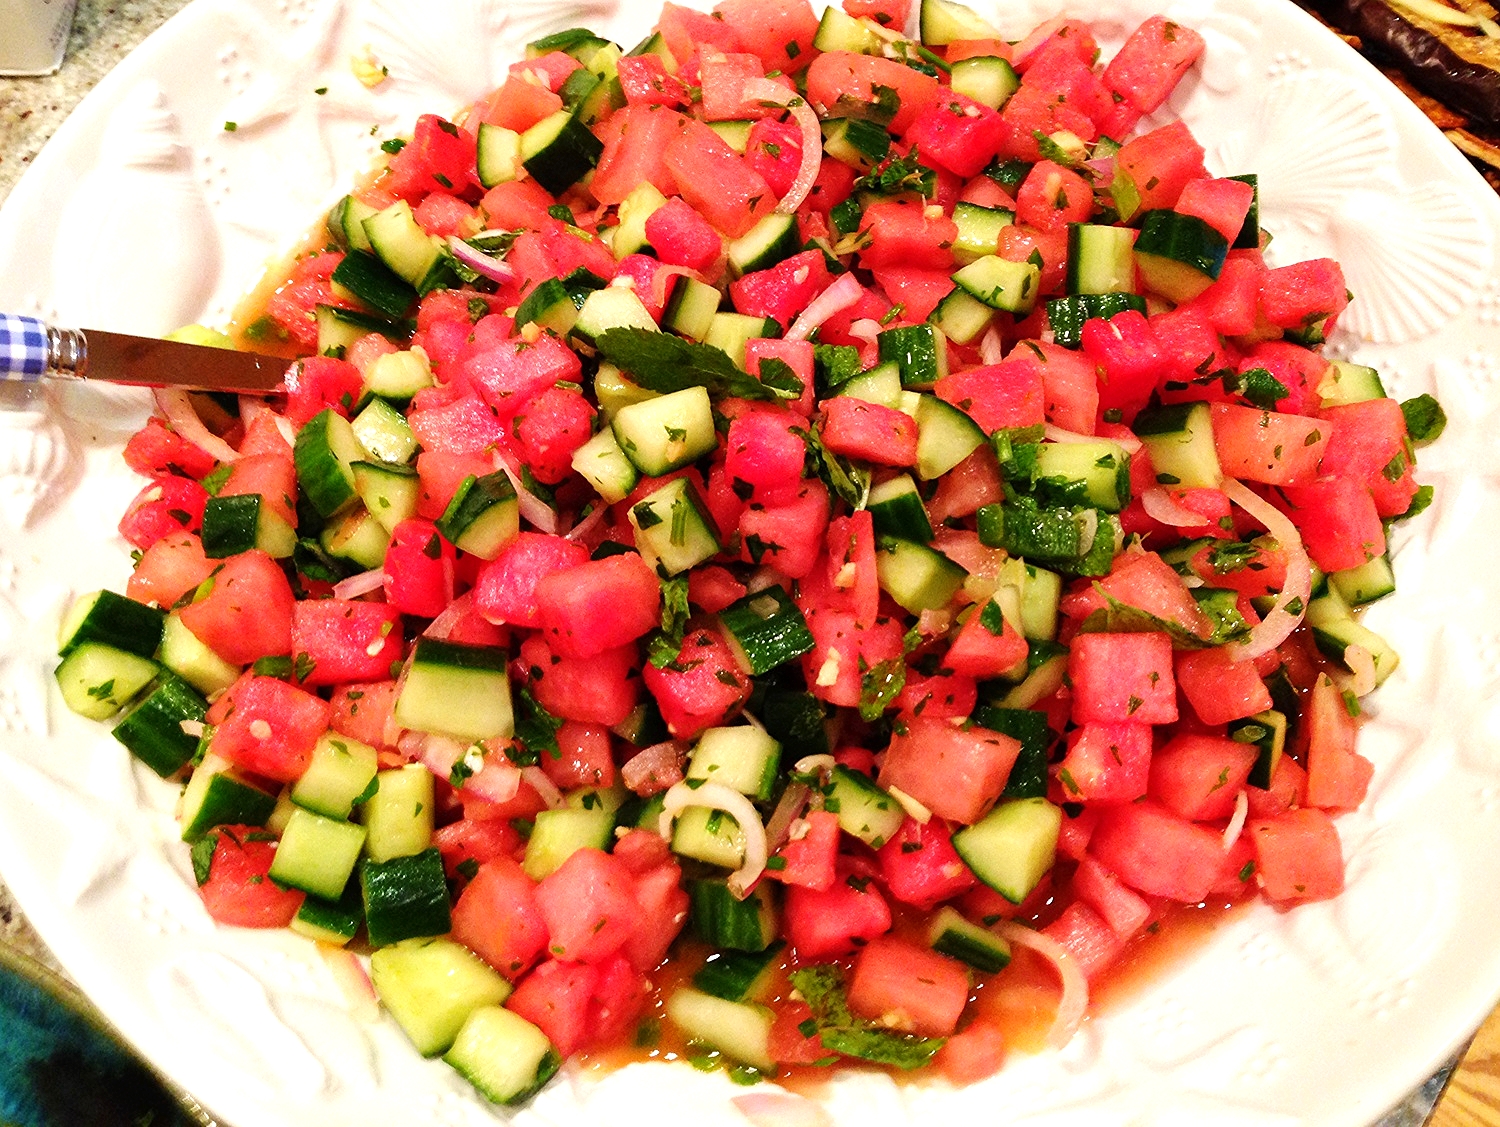 Thai watermelon and cucumber salad with red onion and mint